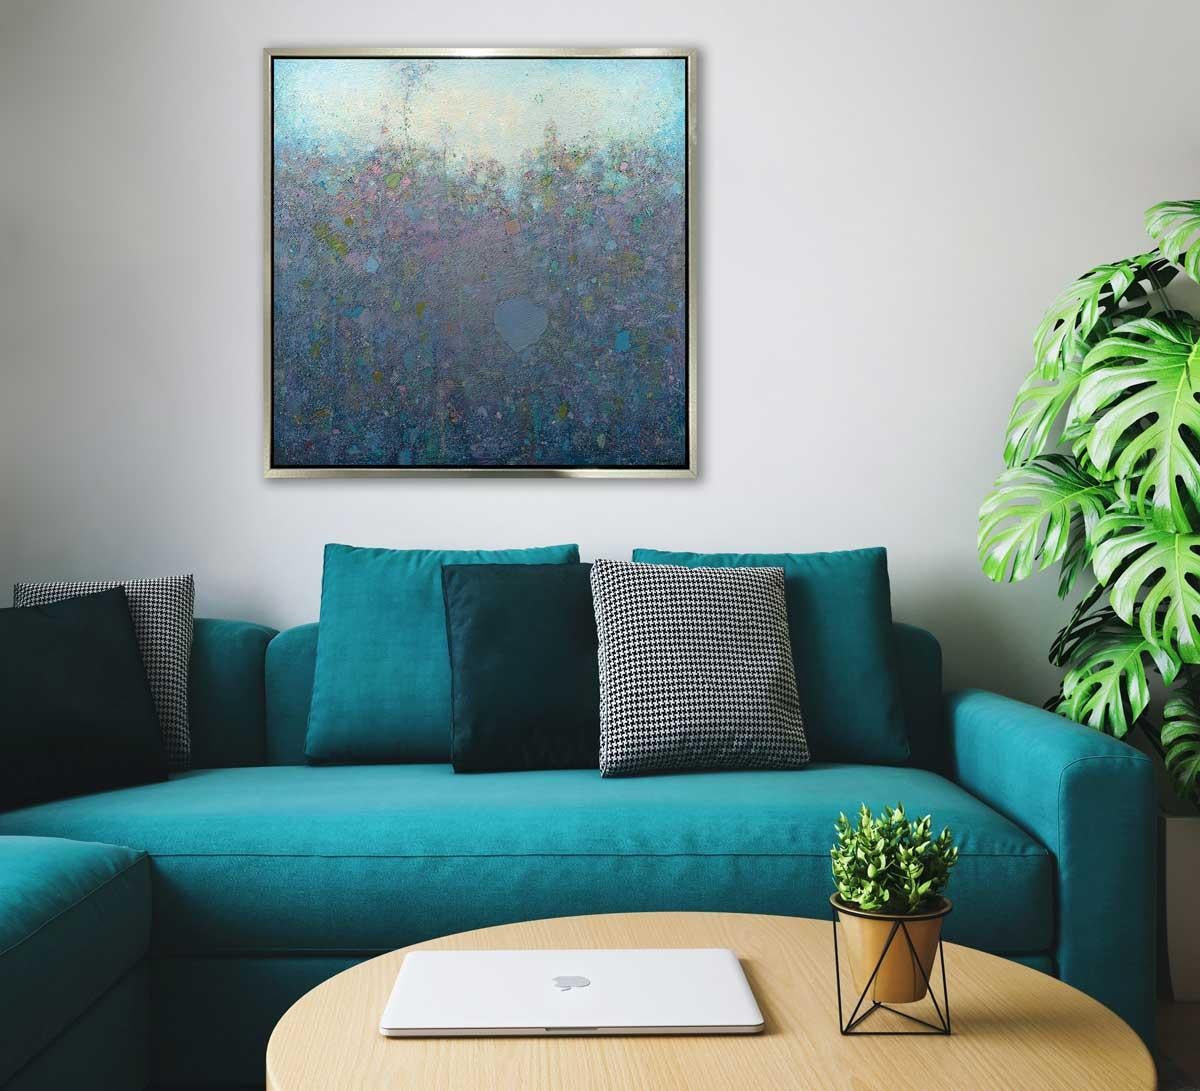 This abstract limited edition print by Elwood Howell features a cool, unique palette. Shapes that resemble thick foliage form a loose horizon line, with deep blue, violet, green, and specks of pink forming the bottom area of the piece. Above is a